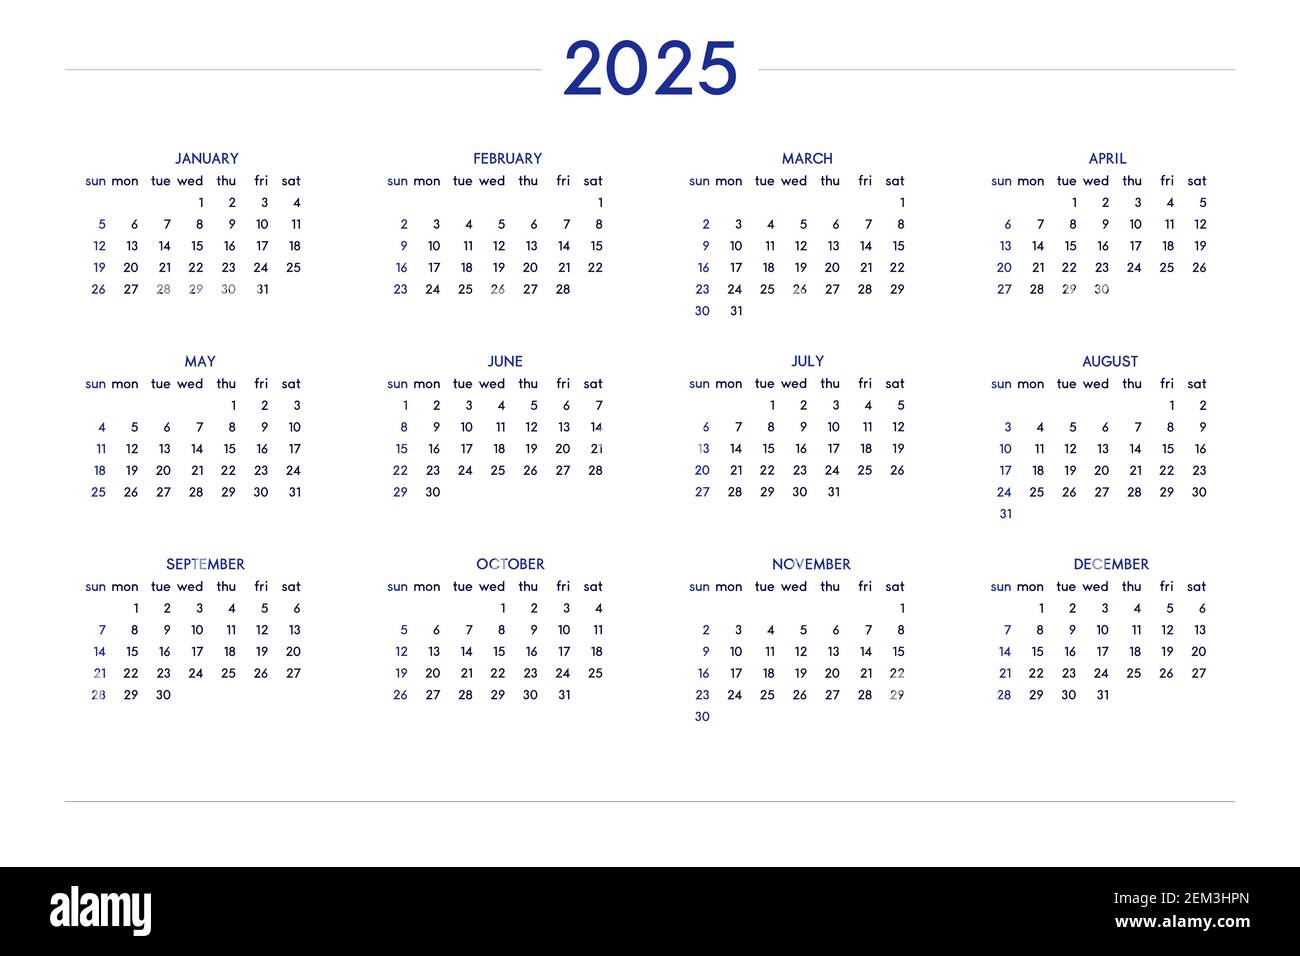 2025-calendar-set-in-classic-strict-style-wall-table-calendar-schedule-minimal-restrained